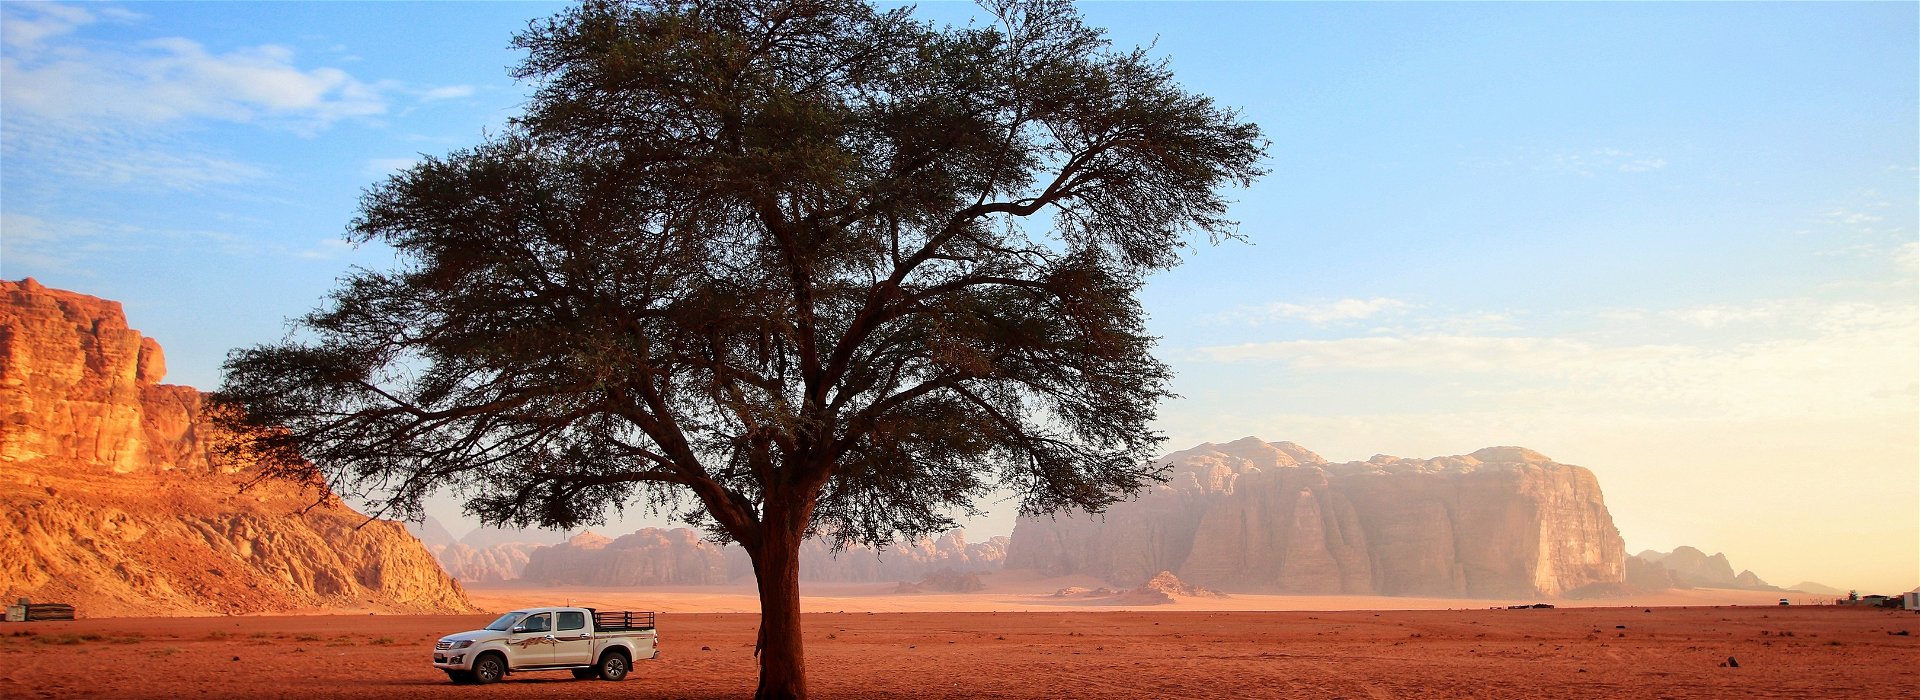 Why an adventure holiday is the best way to see Jordan